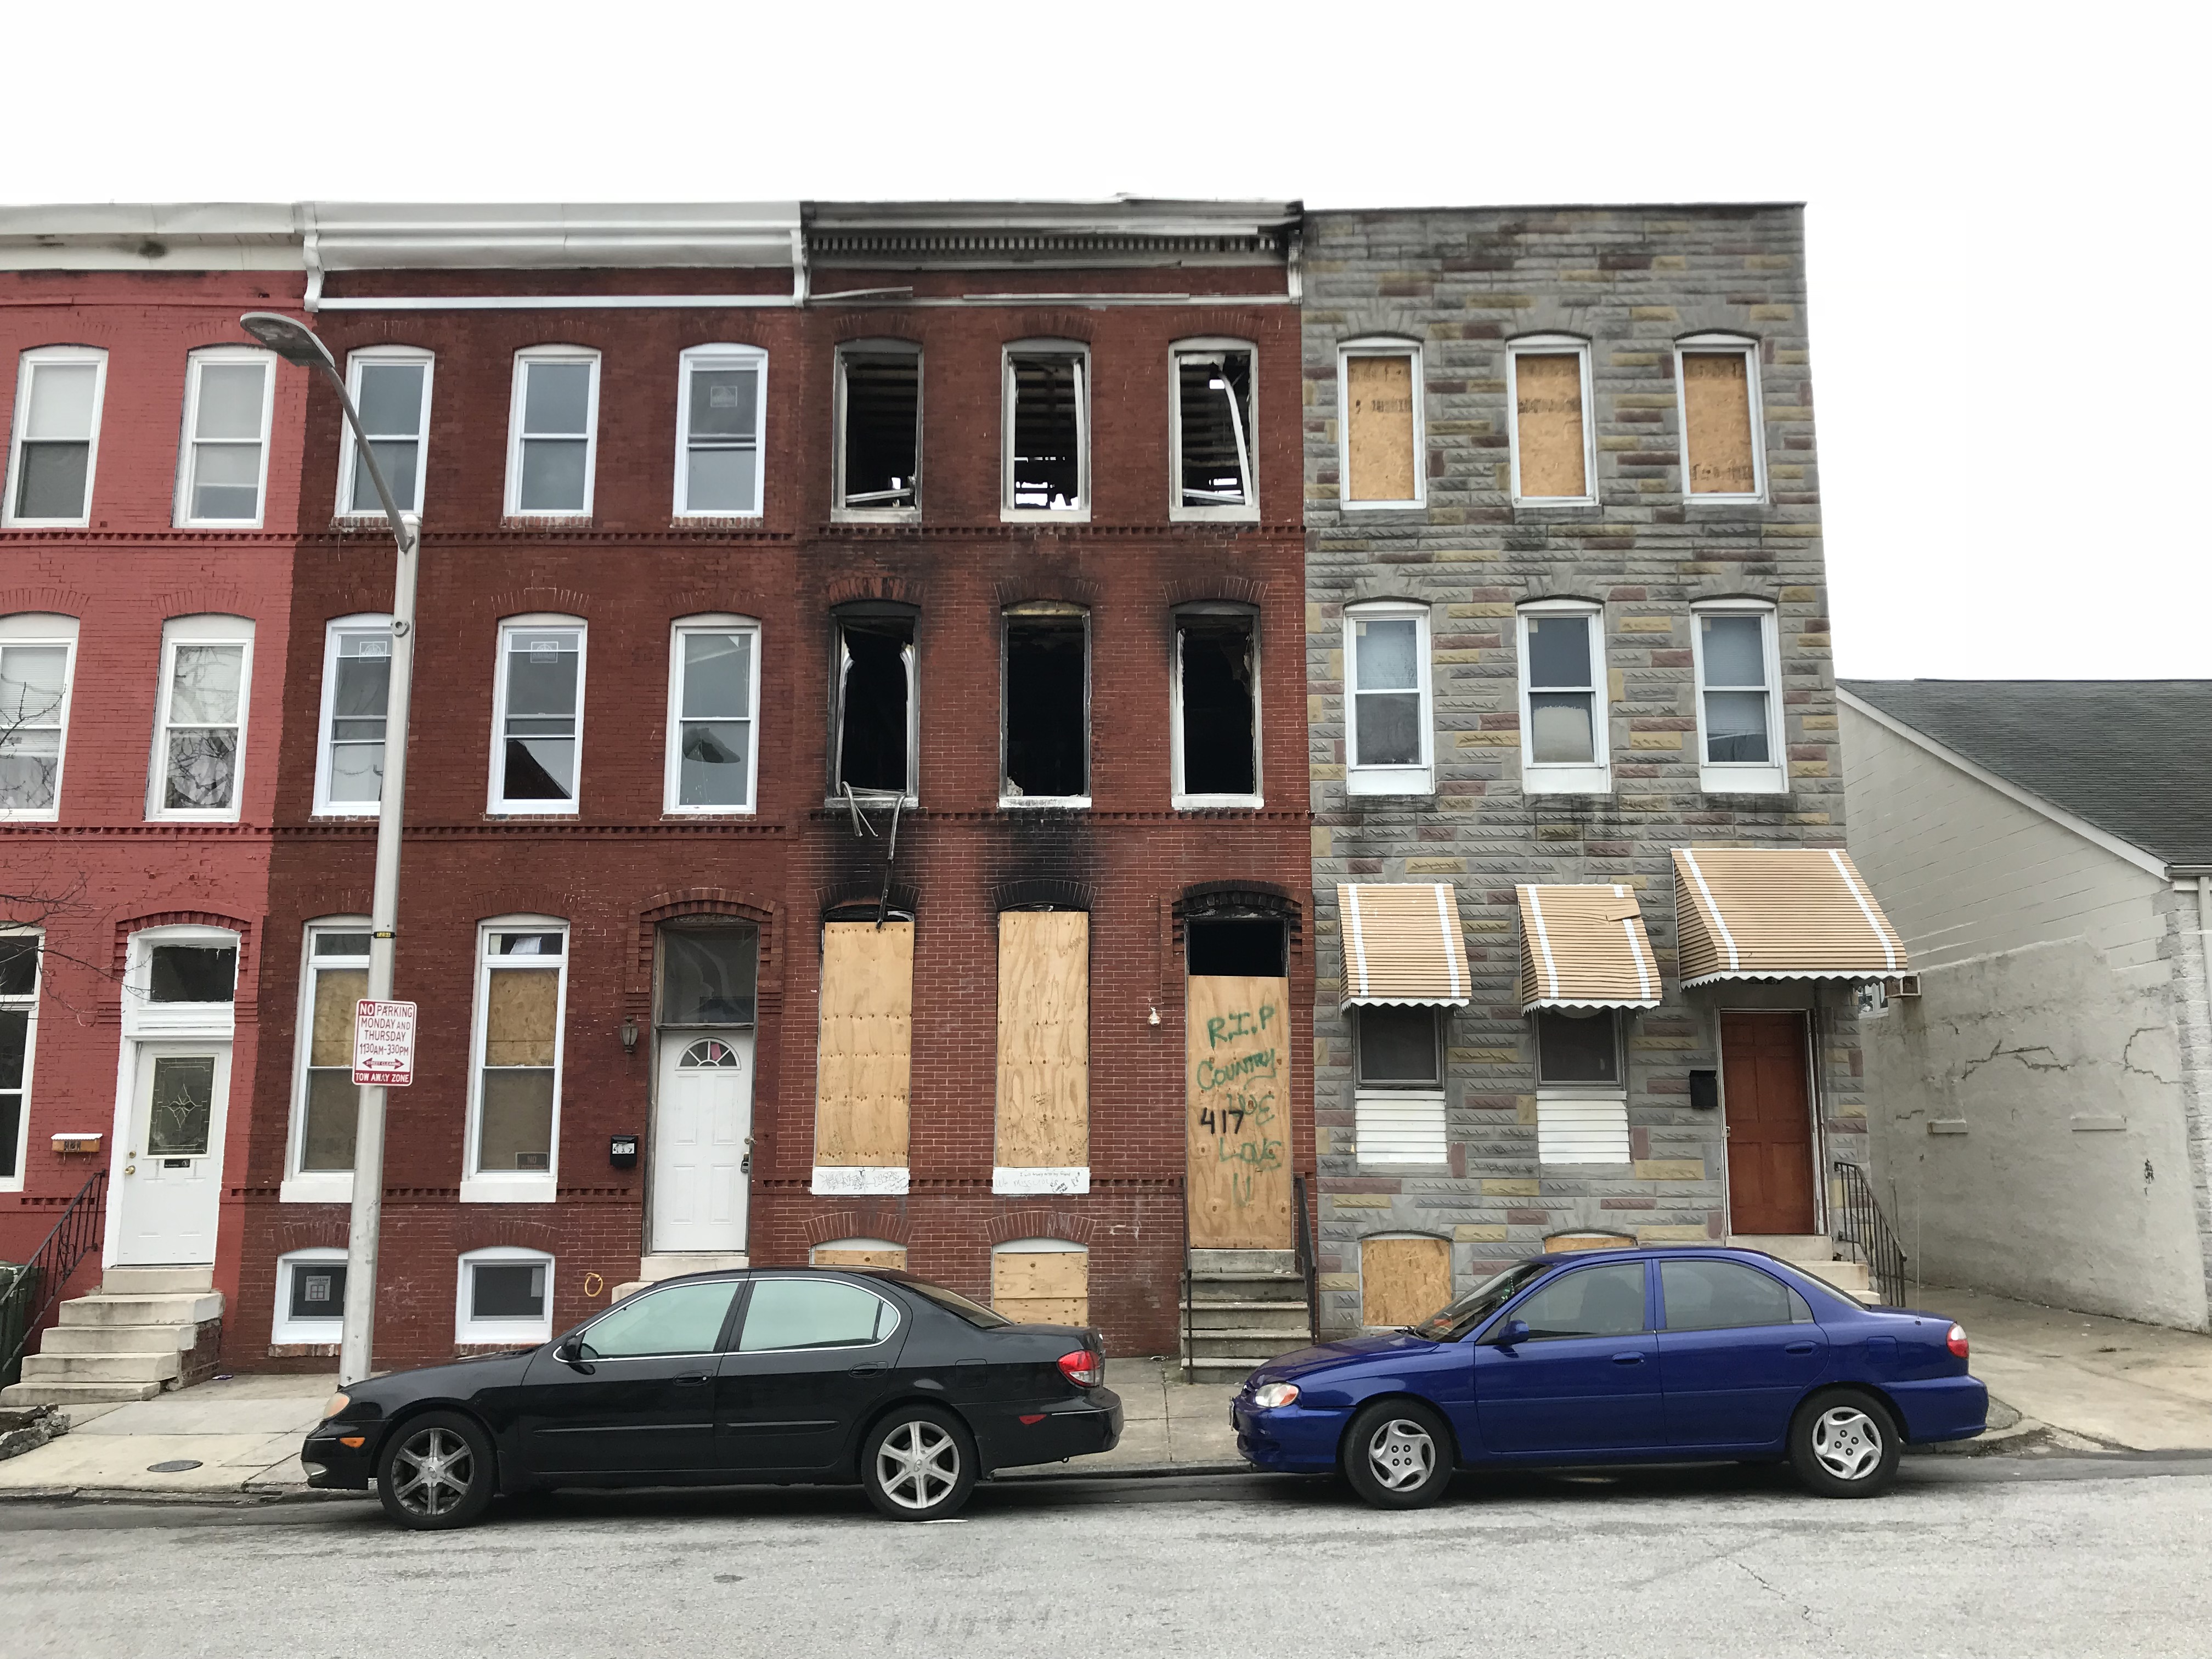 Fire-damaged vacant rowhouse, 417 e. 21st street, baltimore, md 21218 photo